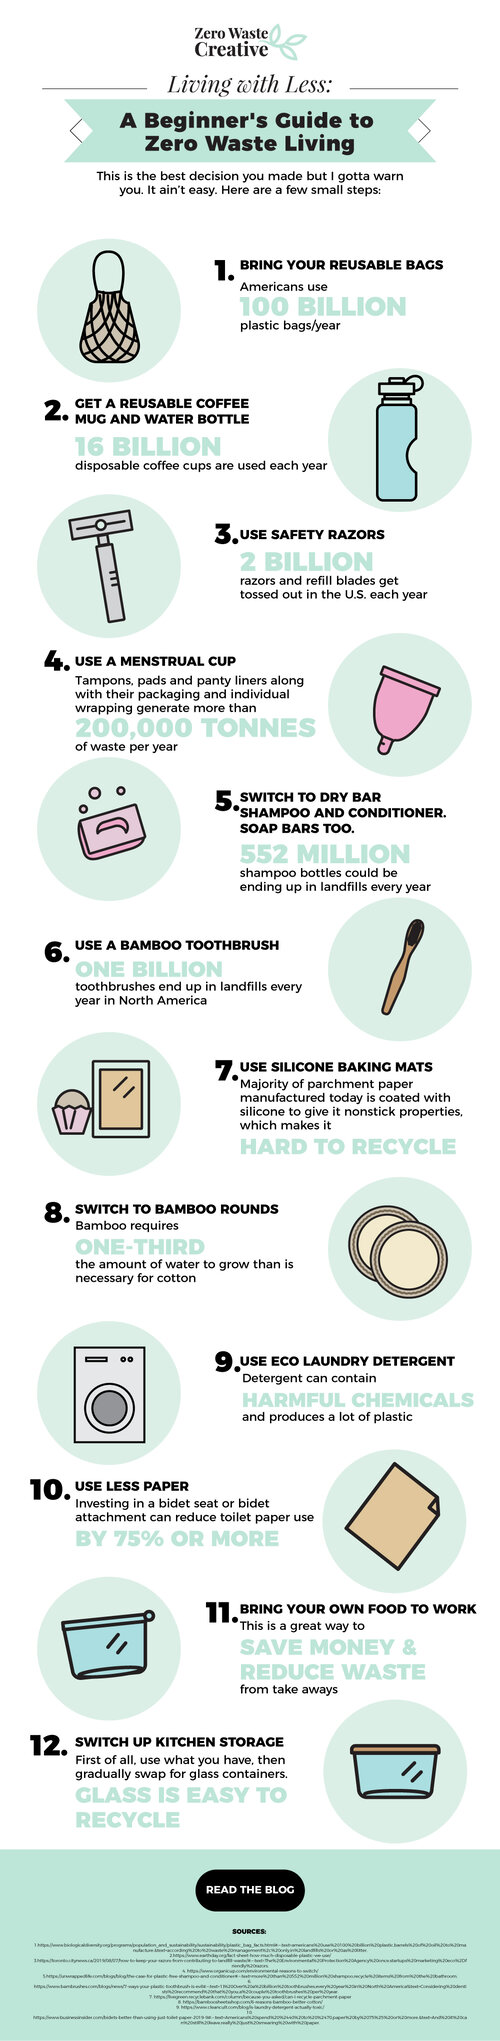 A Zero Waste Guide to Reusable Coffee Cups